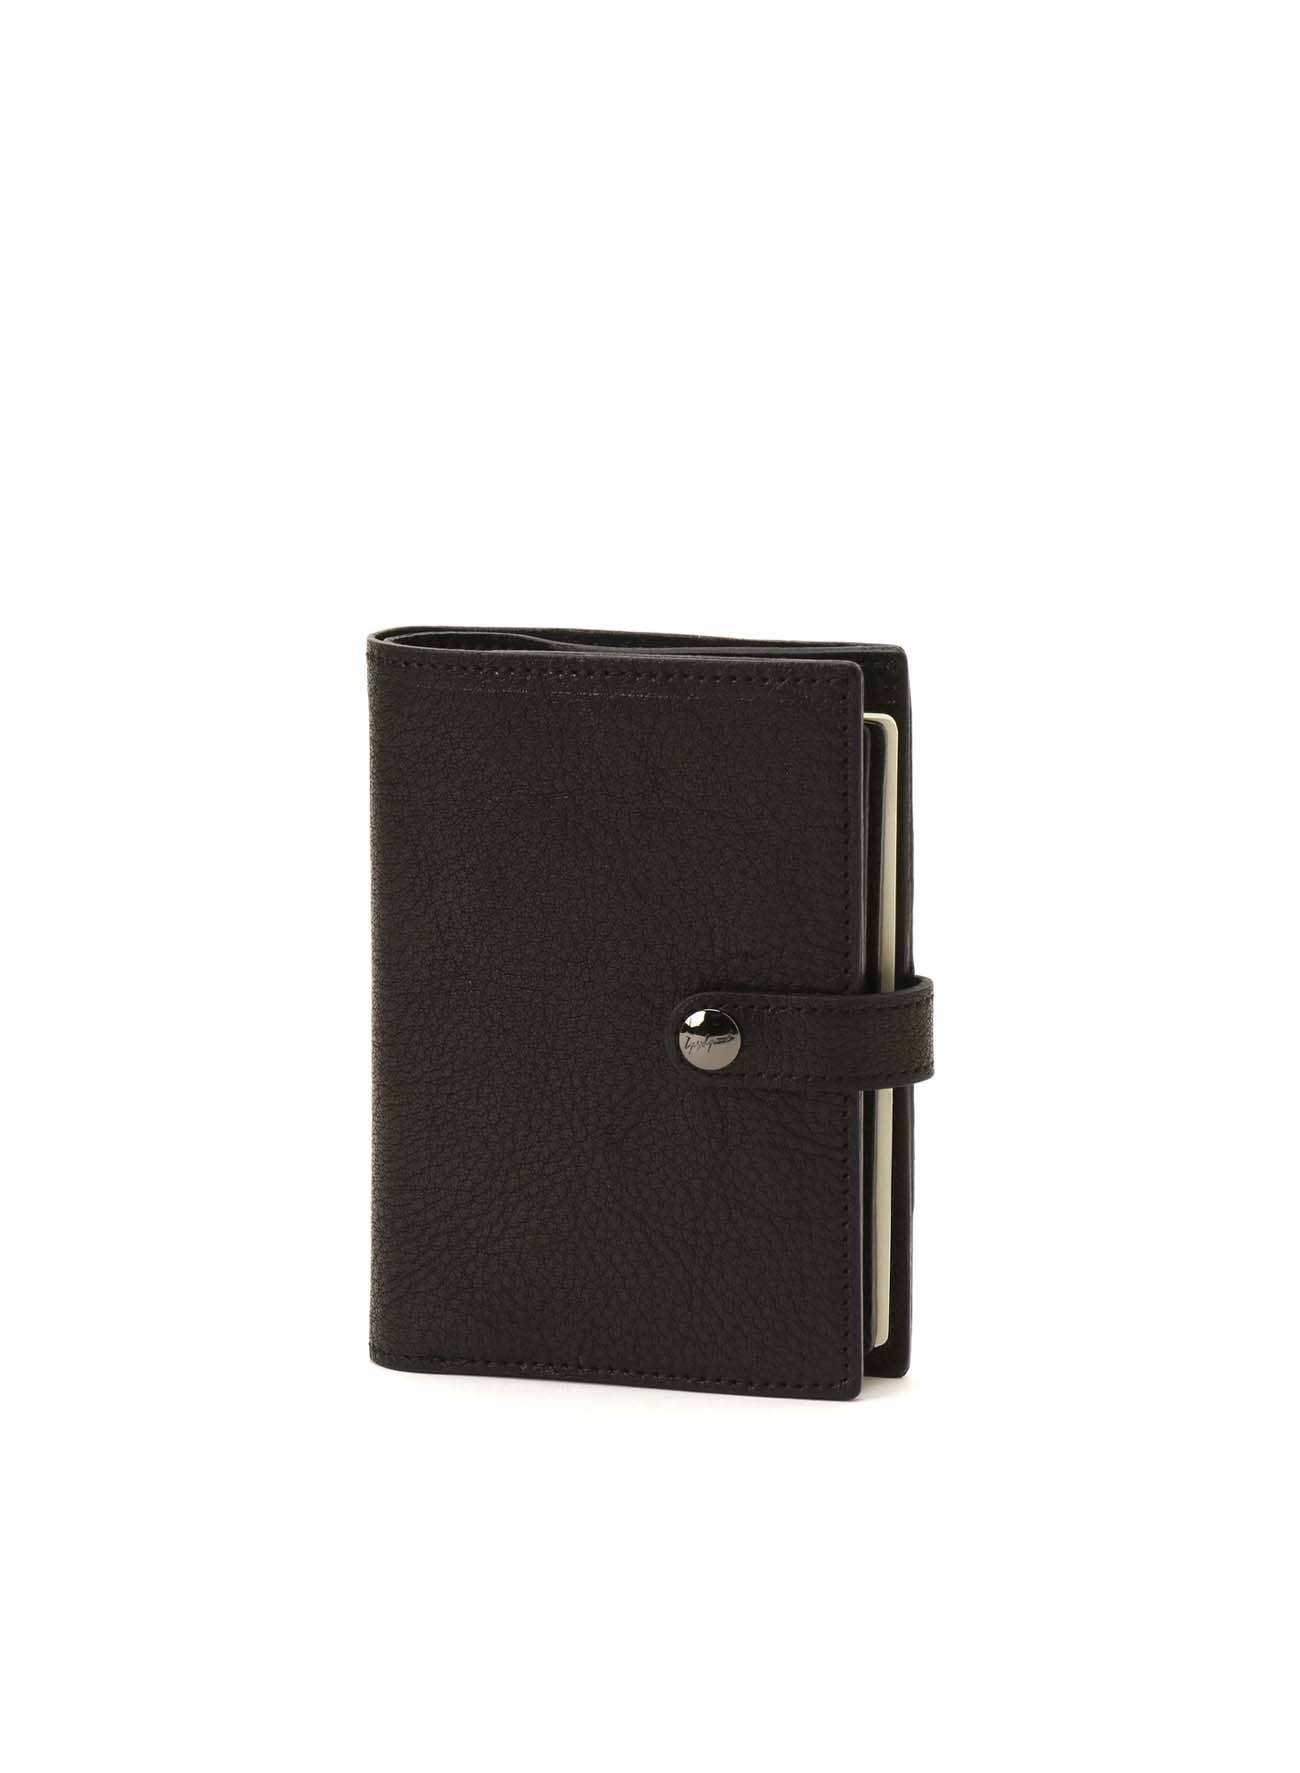 【Launching 12:00(JST), March 6】Binder wallet